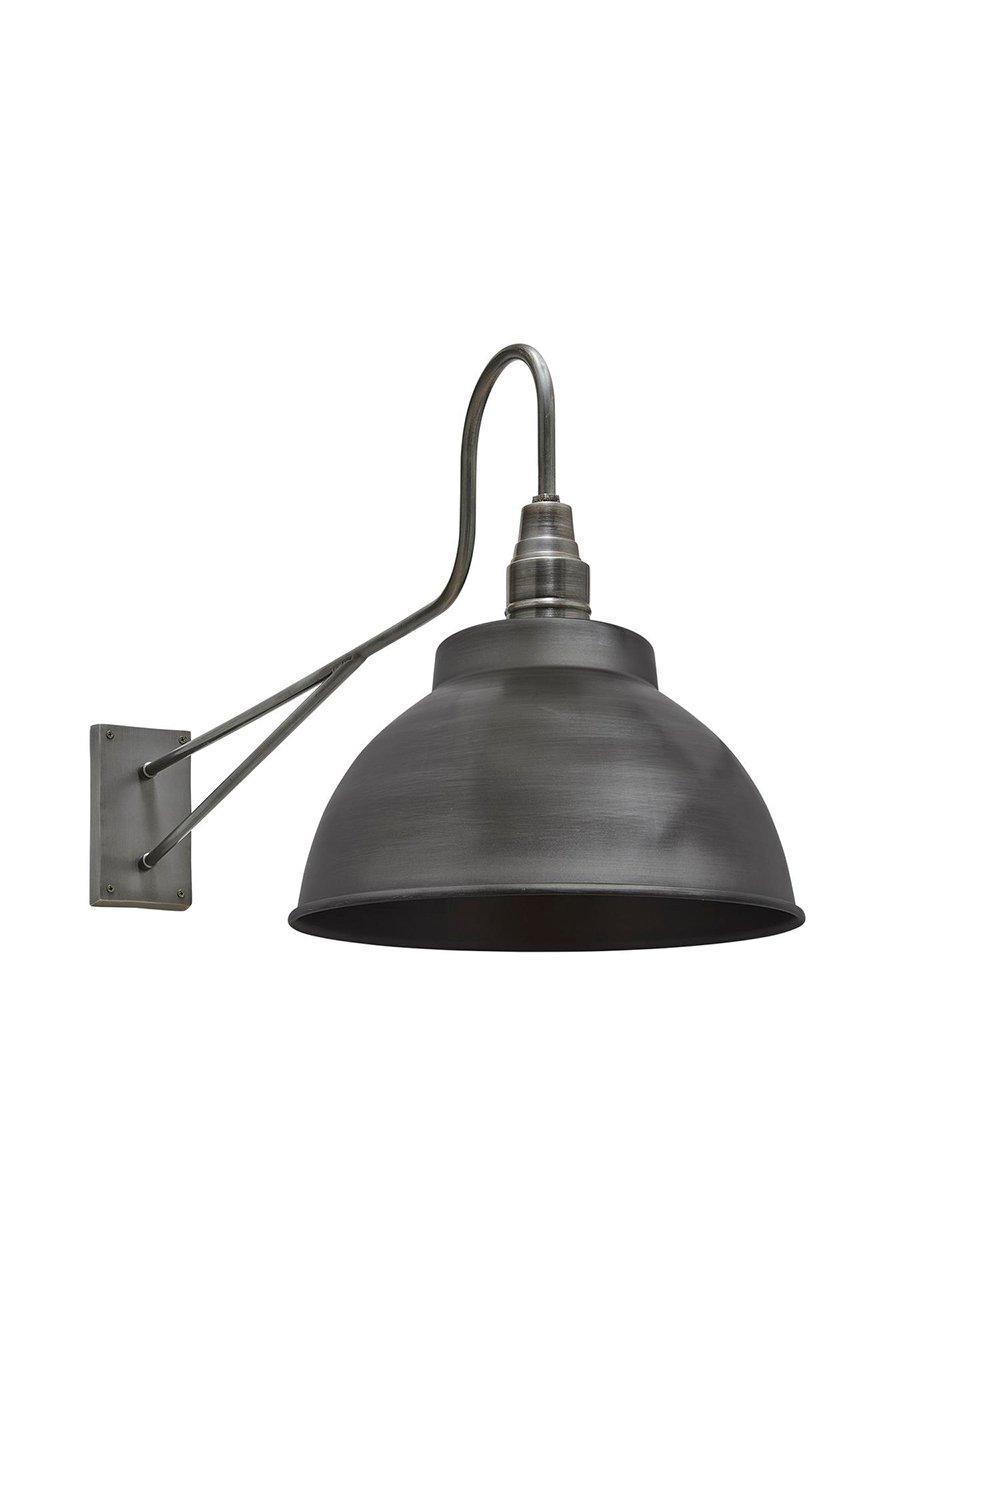 Long Arm Dome Wall Light, 13 Inch, Pewter, Pewter Holder